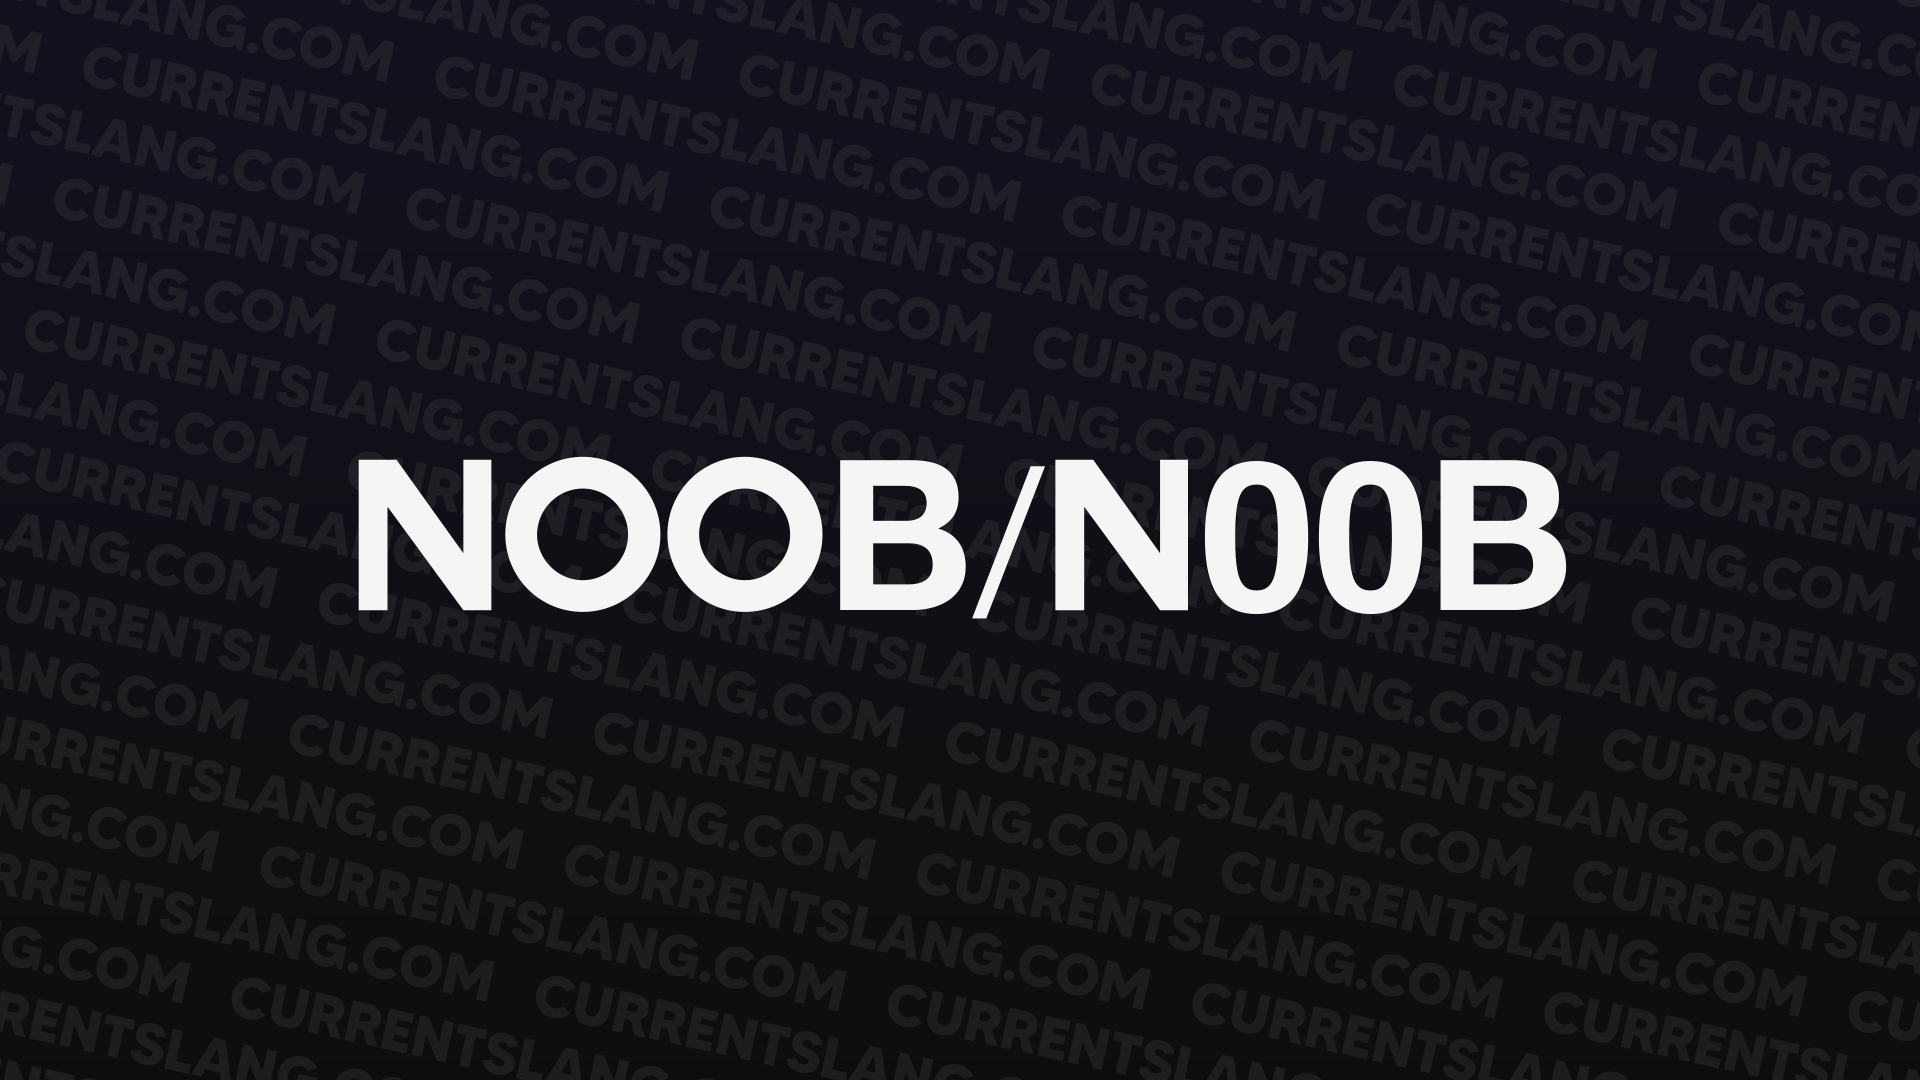 title image for Noob/n00b